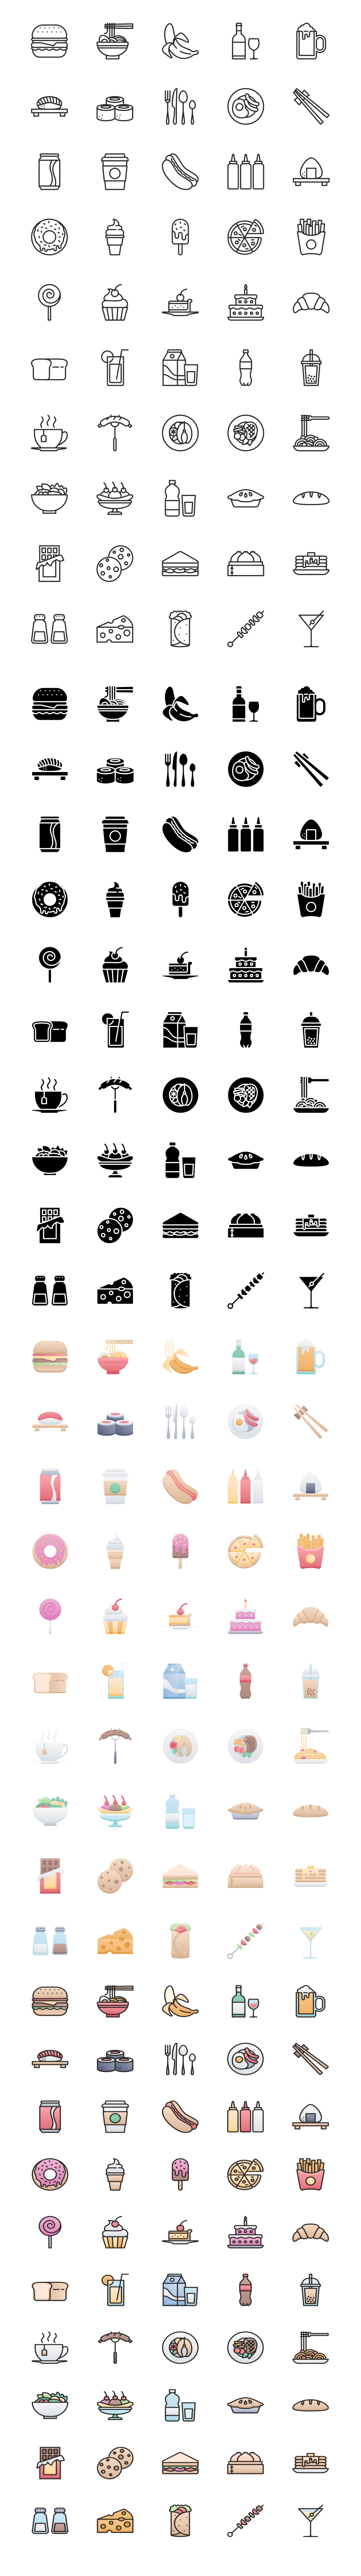 50 Food & Drink Free Icons